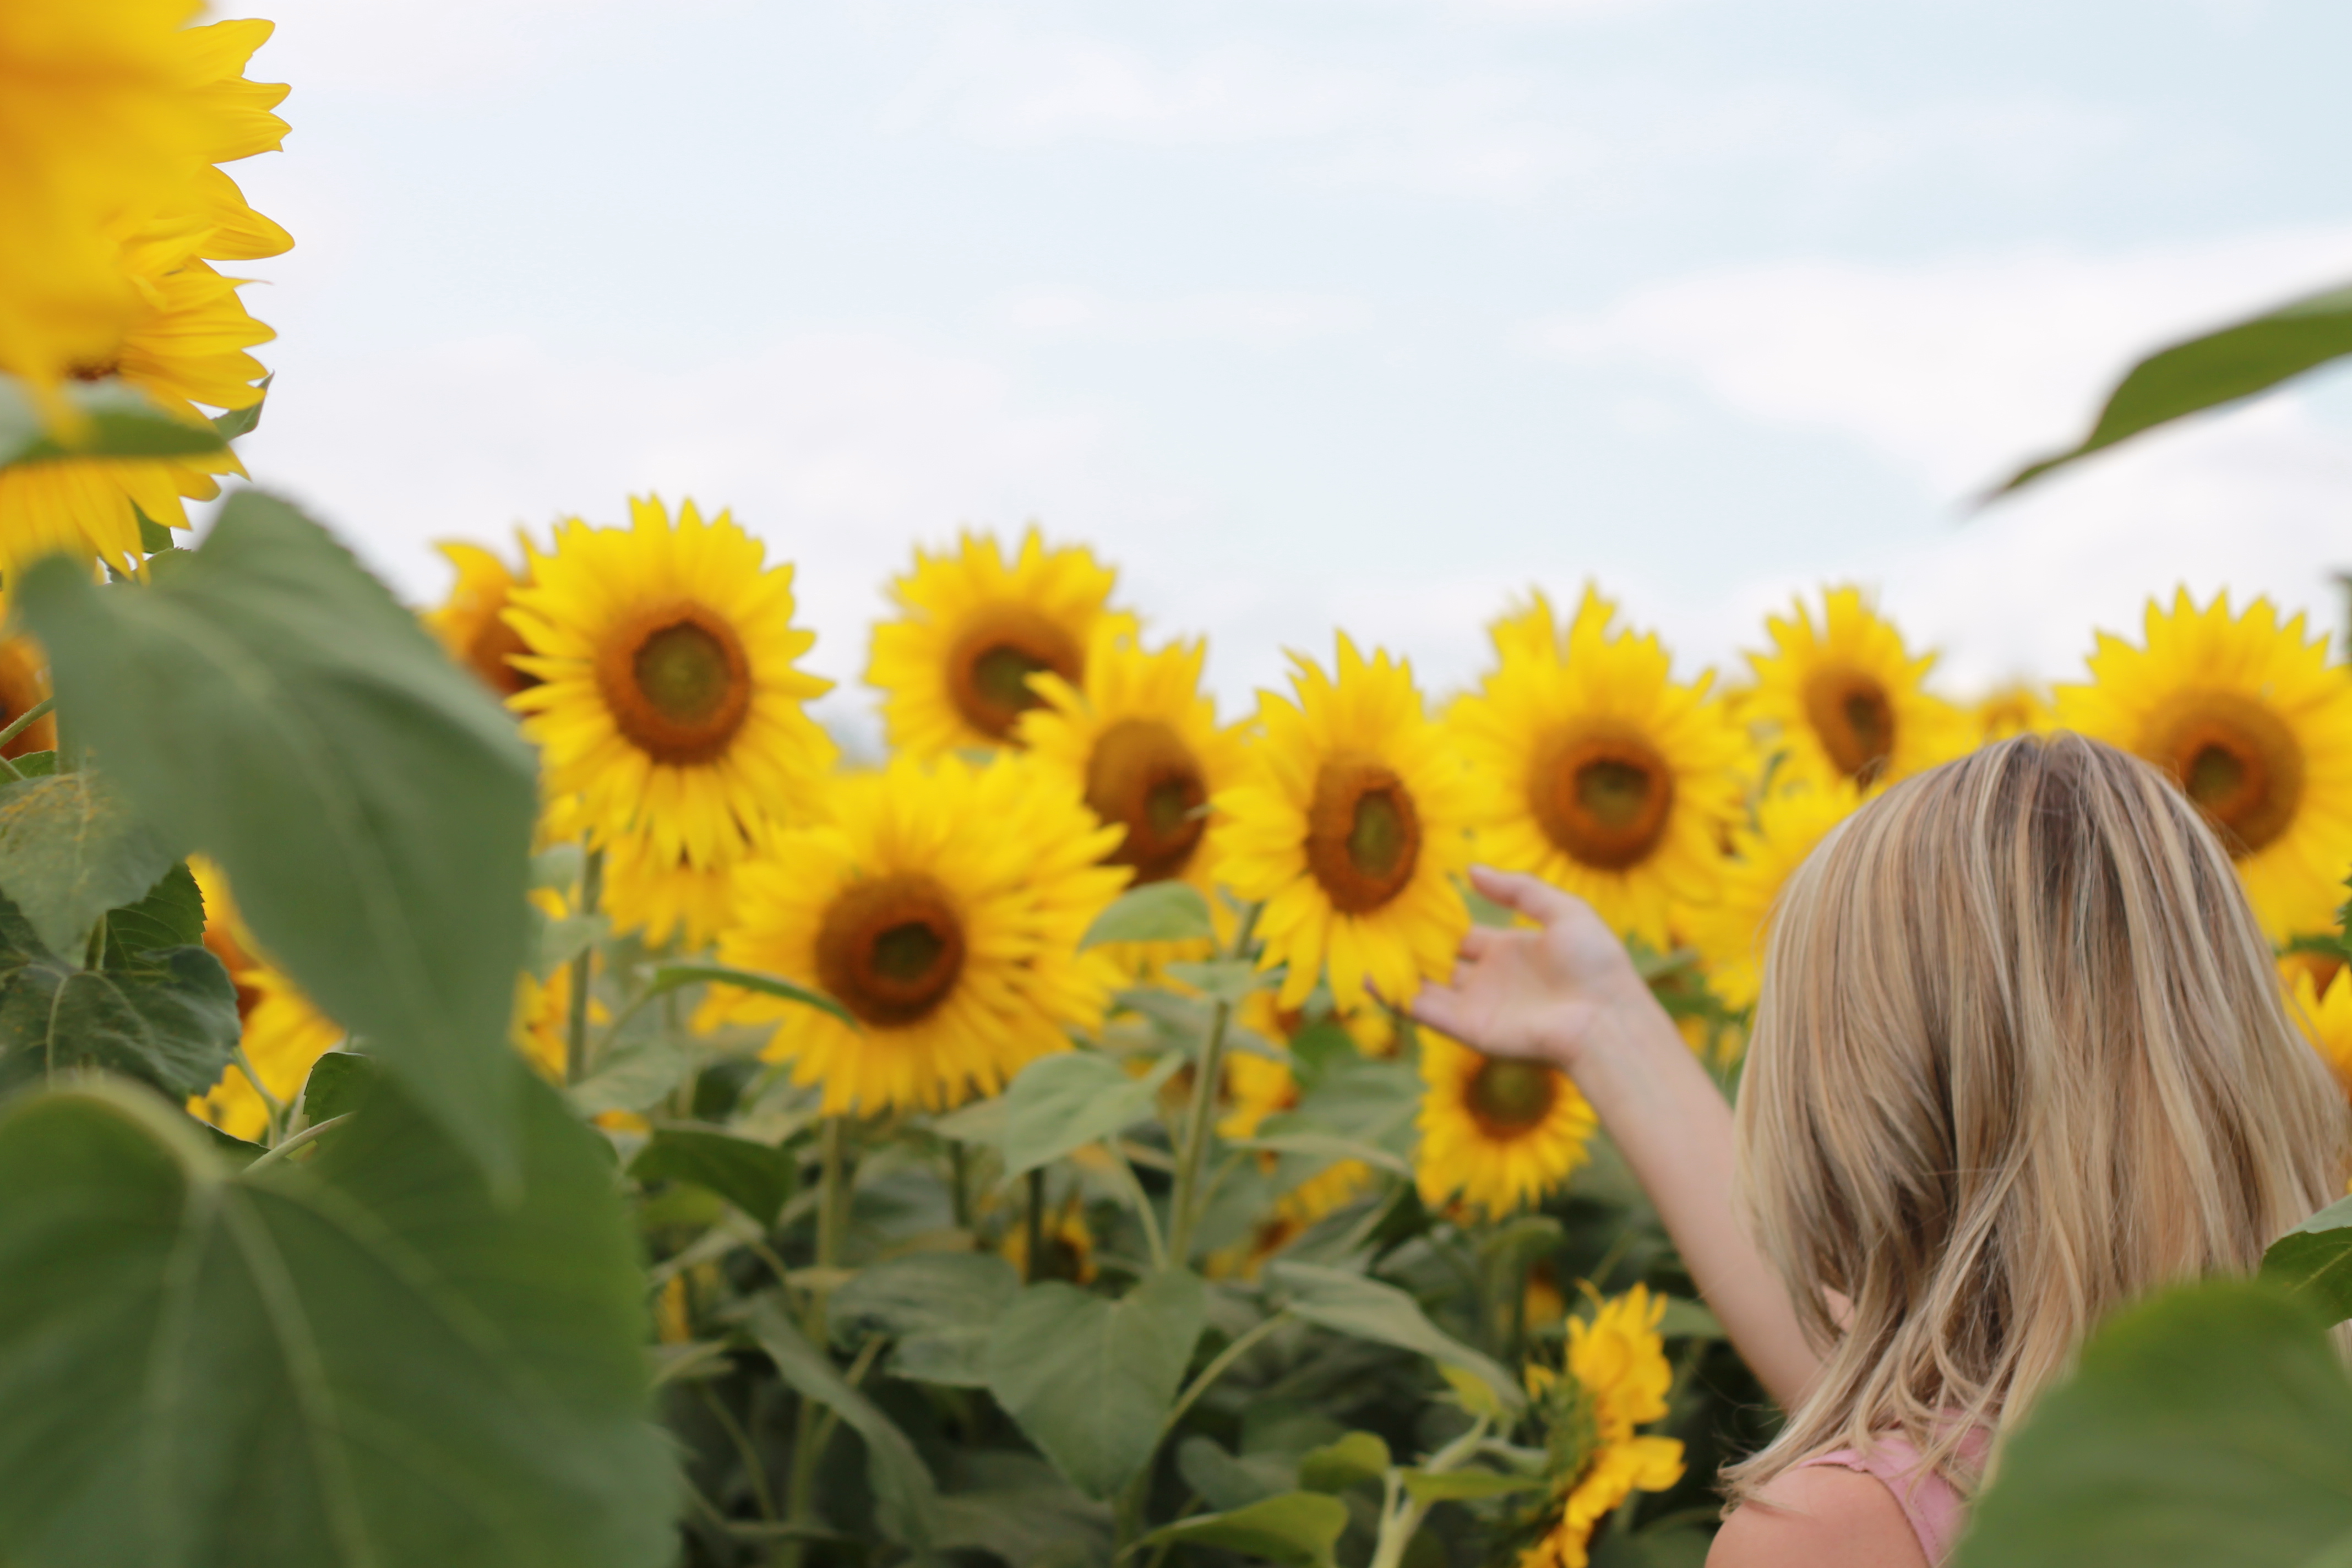 Girl in sunflower field at Colby Farm | ourlittlehomestyle.com